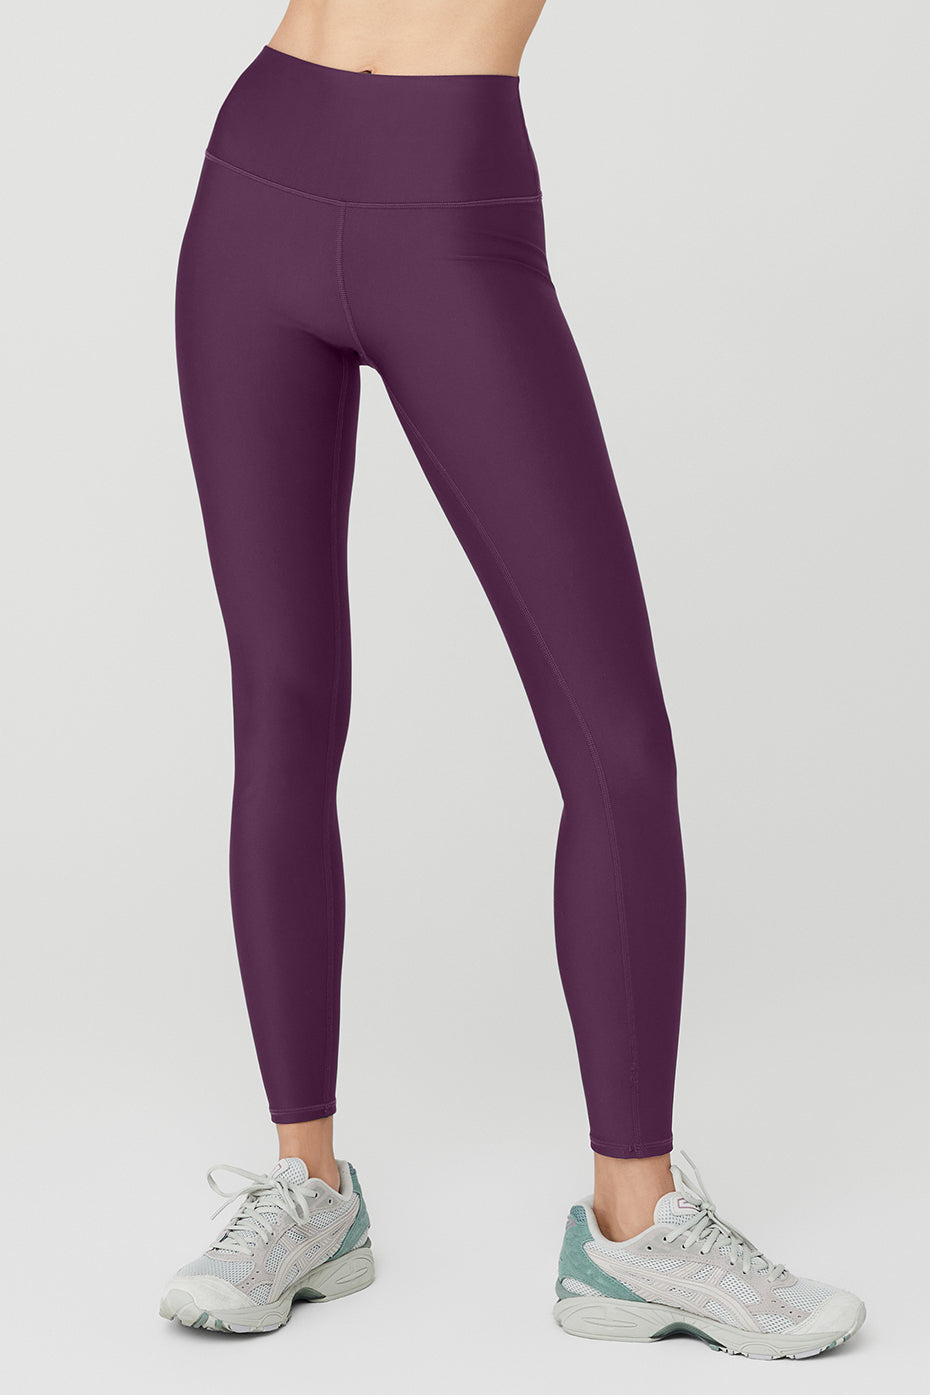 Alo Yoga Pants Clearance  International Society of Precision Agriculture